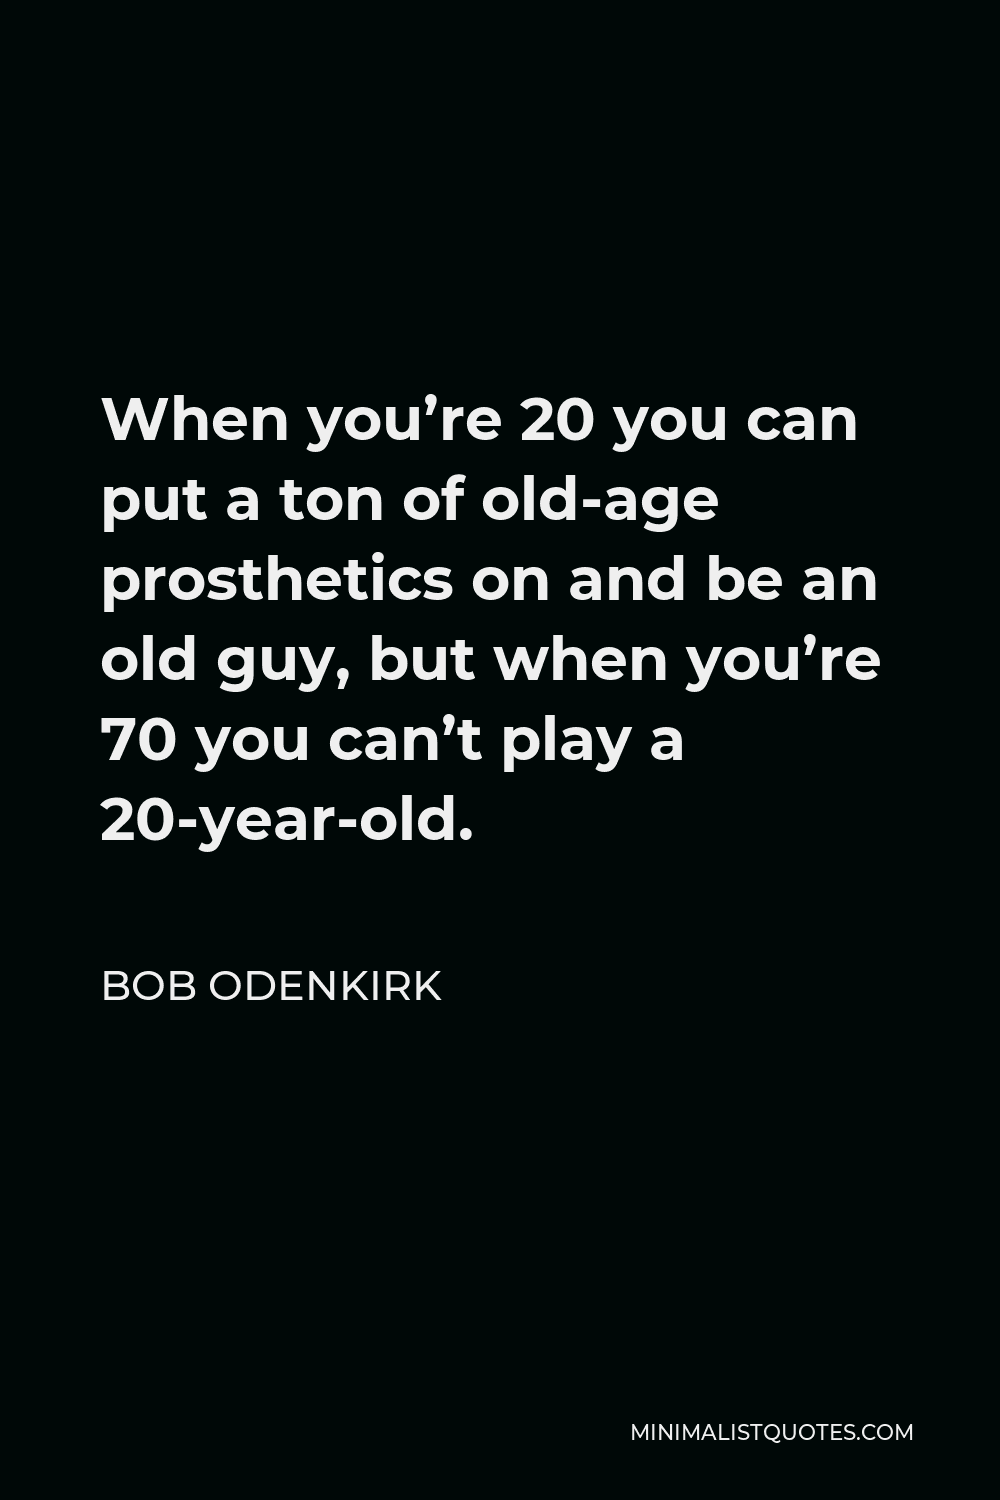 Bob Odenkirk Quote - When you’re 20 you can put a ton of old-age prosthetics on and be an old guy, but when you’re 70 you can’t play a 20-year-old.